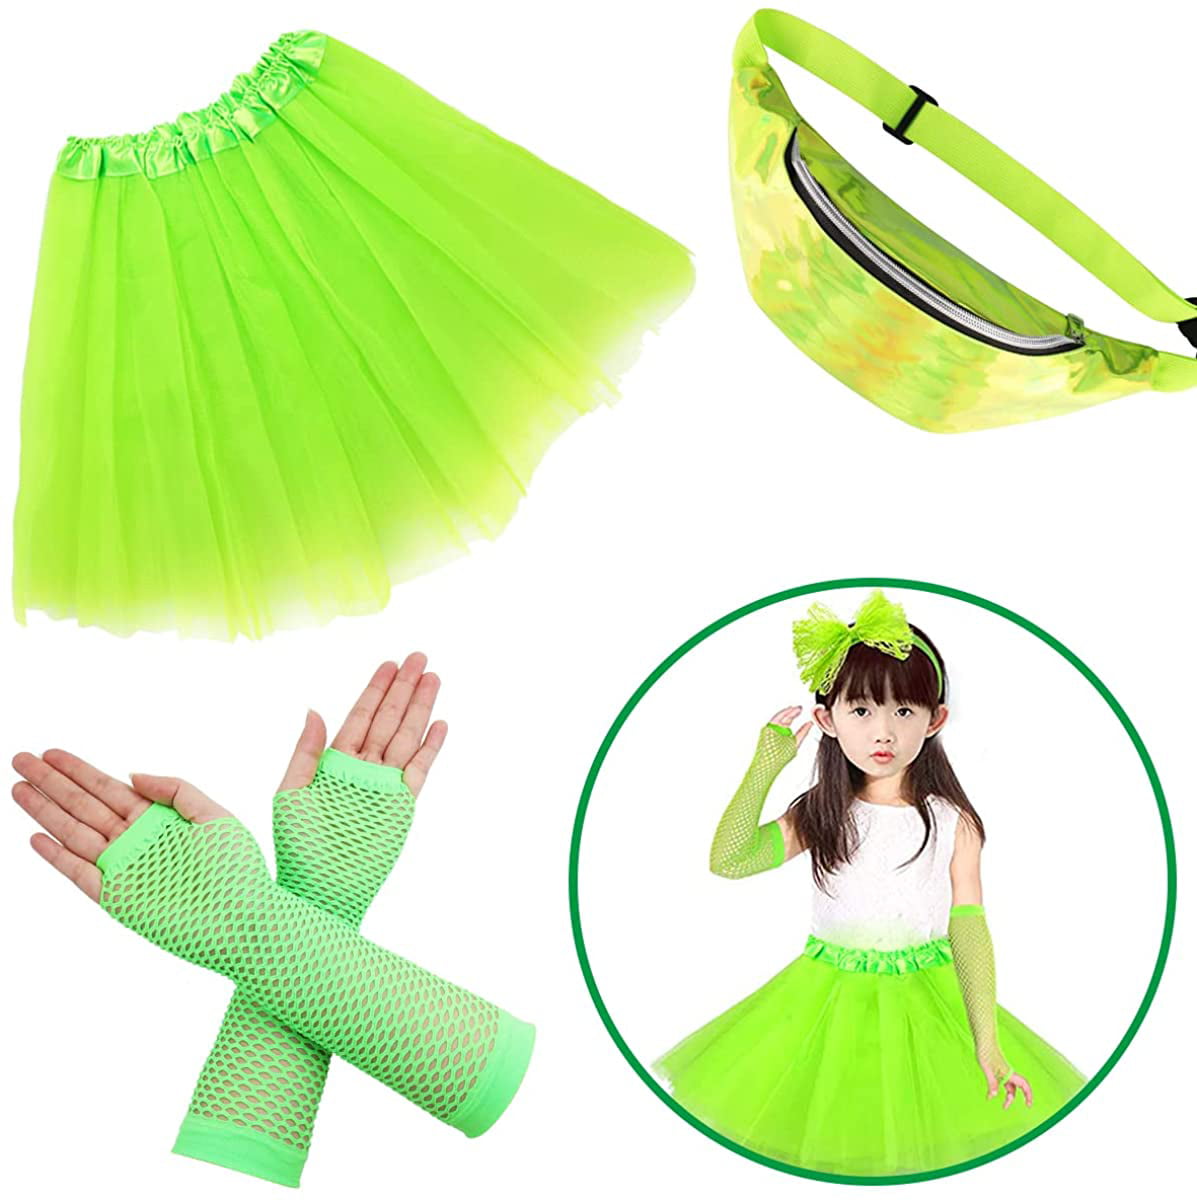 80s Costume Accessories for Women, 17Pcs 80s Retro Party Dress with Net  Yarn Skirt, Fanny Pack, Fingerless Fishnet Gloves, Necklace, Bracelet,  Earring, Party Accessories For Women 